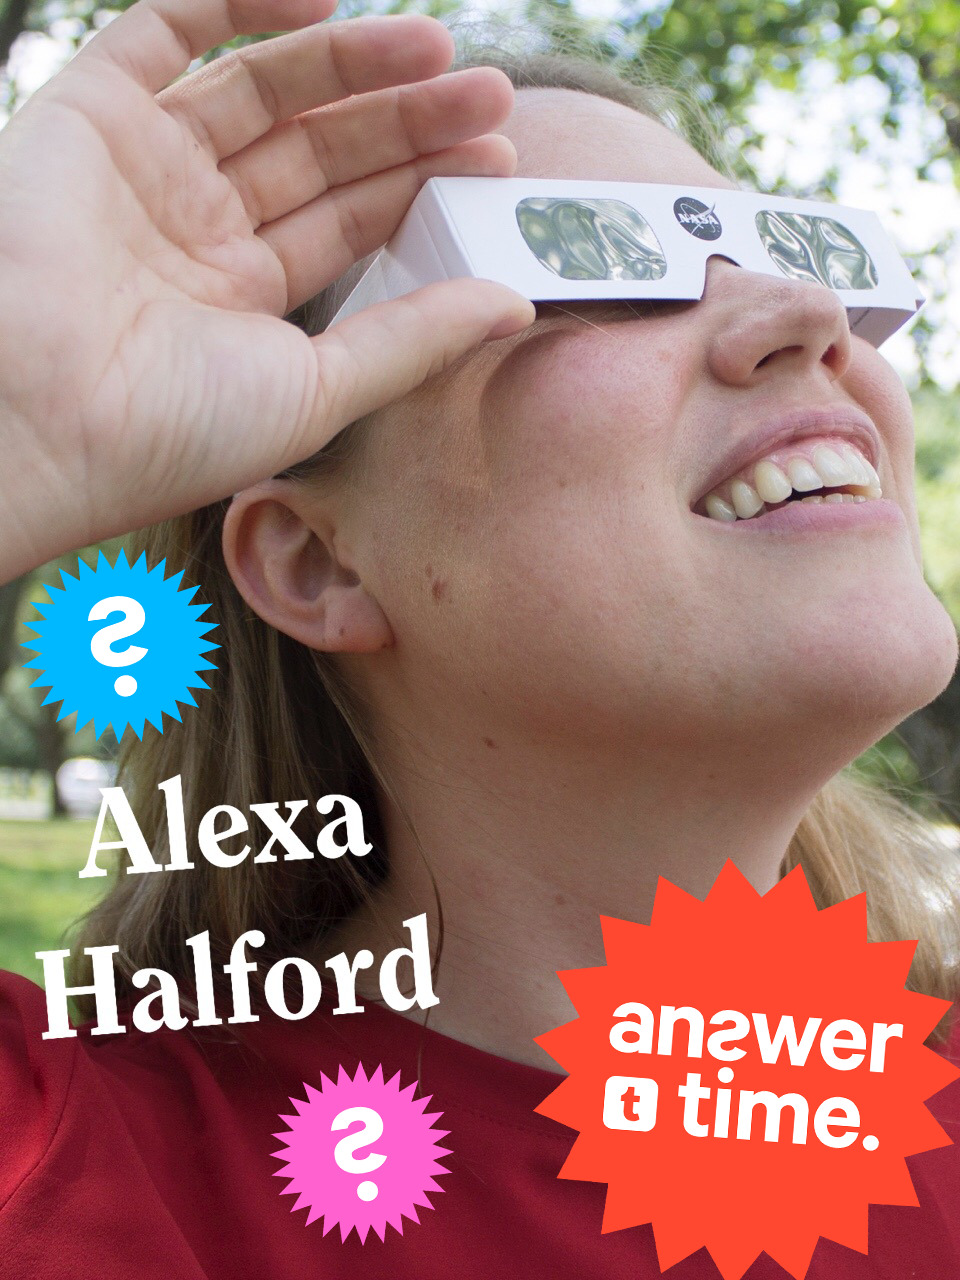 The total solar eclipse is coming! Here’s your chance to ask an eclipse scientist…